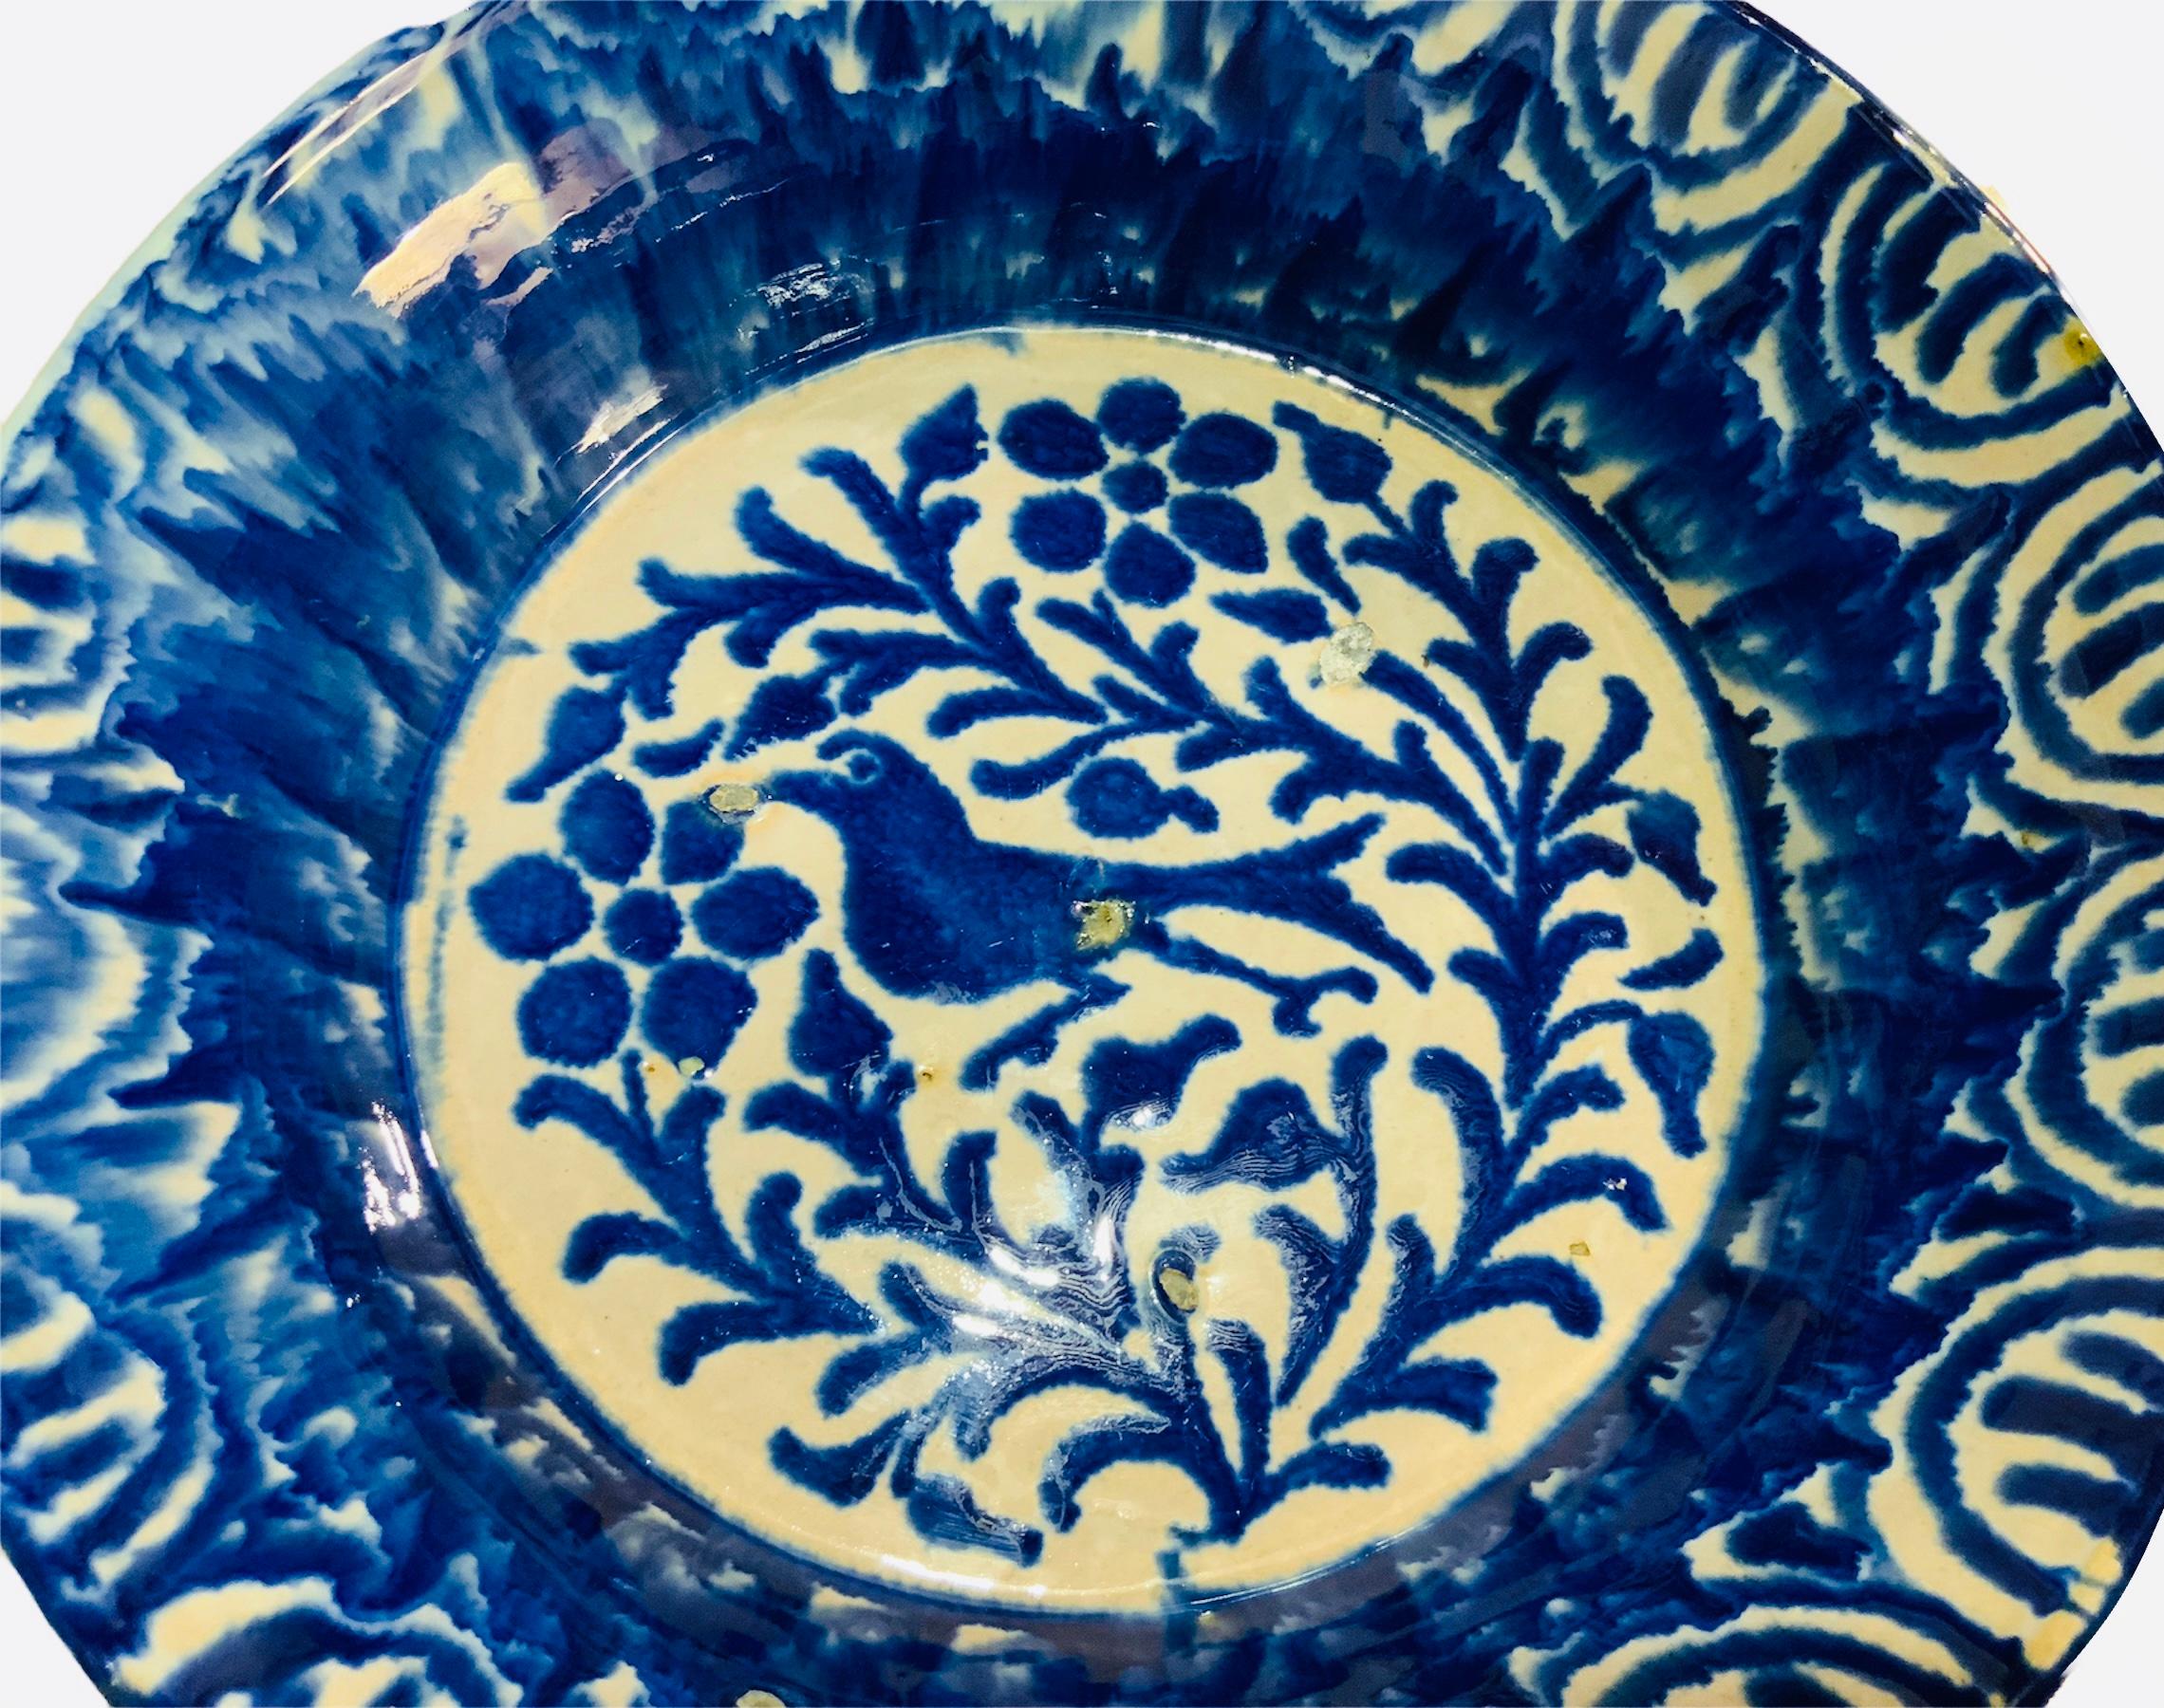 This is a Fajalauza style ceramic bowl from Spain. It depicts a round bowl hand painted cobalt blue and white with a bird and some branches of flowers in the center. Above this center, there is a pattern of cobalt blue splashes of painting. The